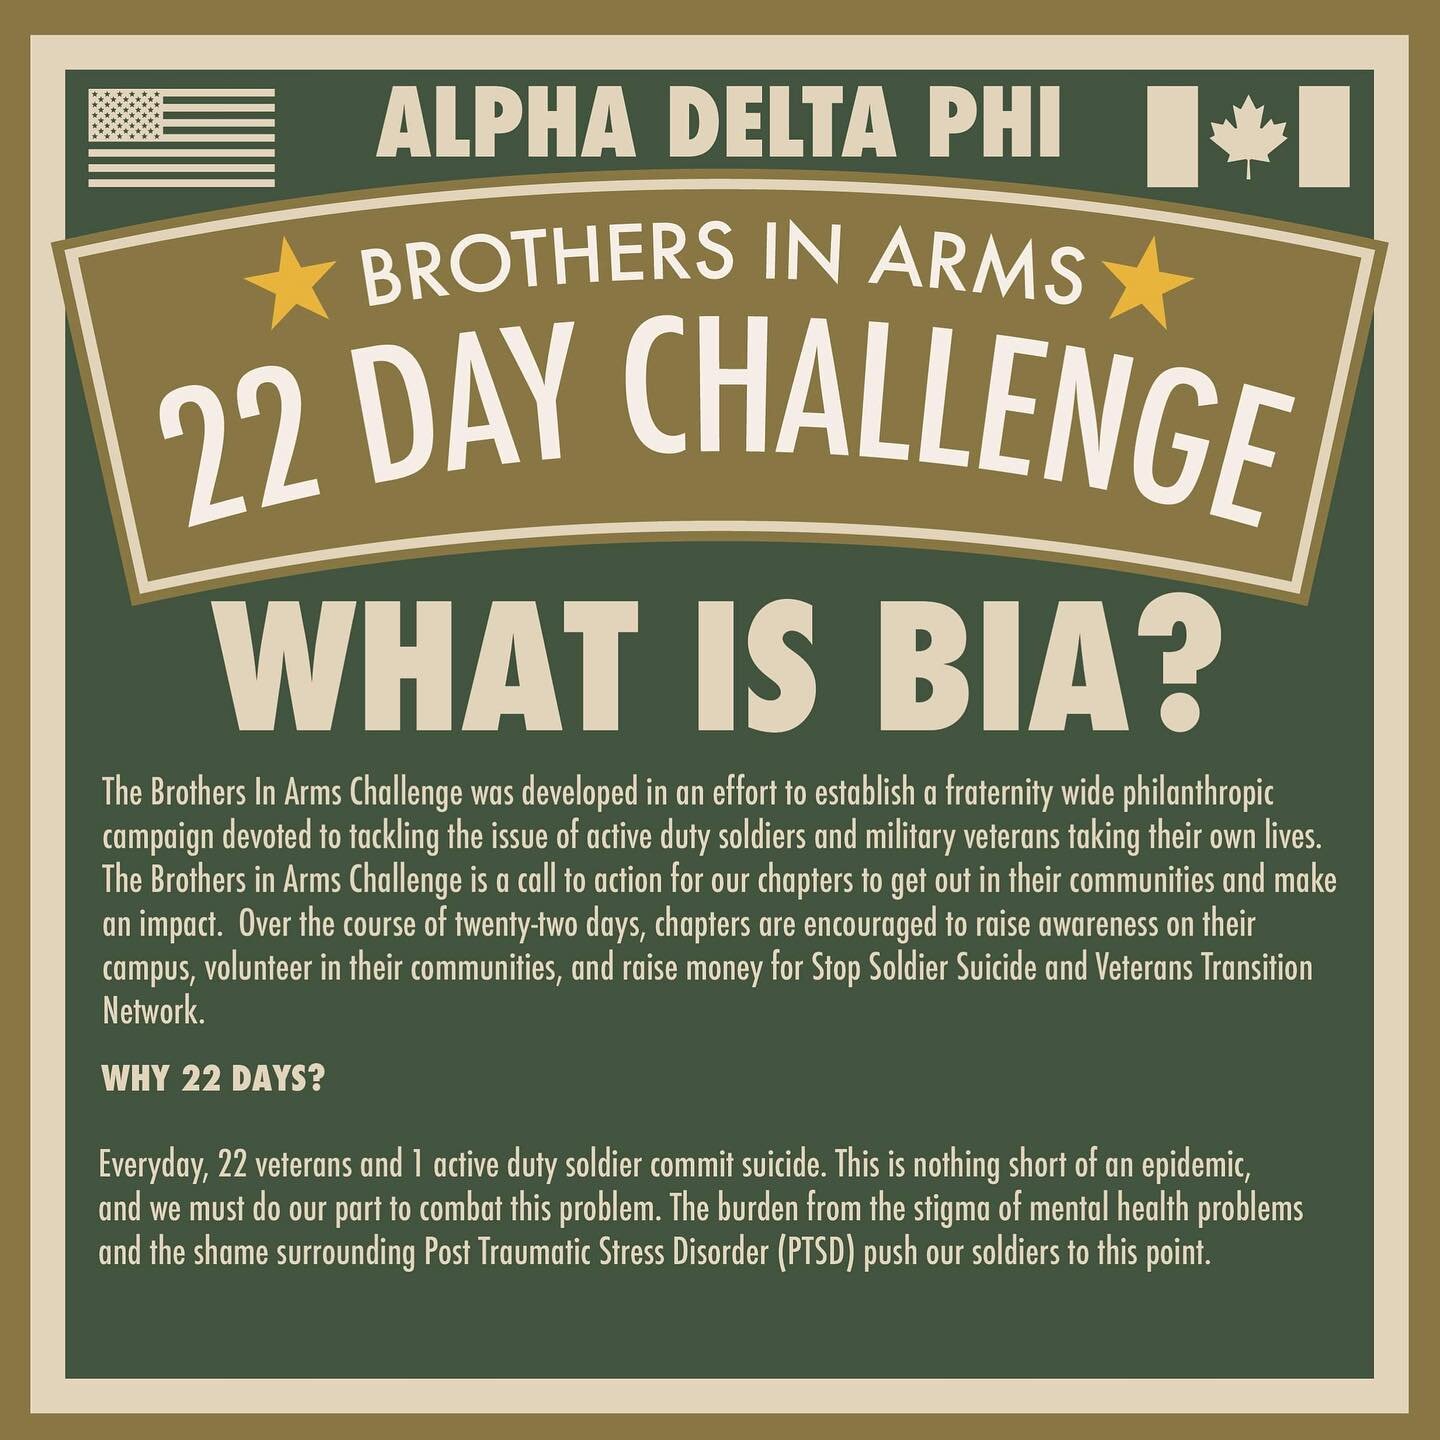 BIA is back!

The goal of our Brothers In Arms event is to raise awareness and money for the Veteran&rsquo;s Transition Network. 

Join the BC Chapter by doing 22 push-ups a day and donating through the link in our bio!

#GoAlpha